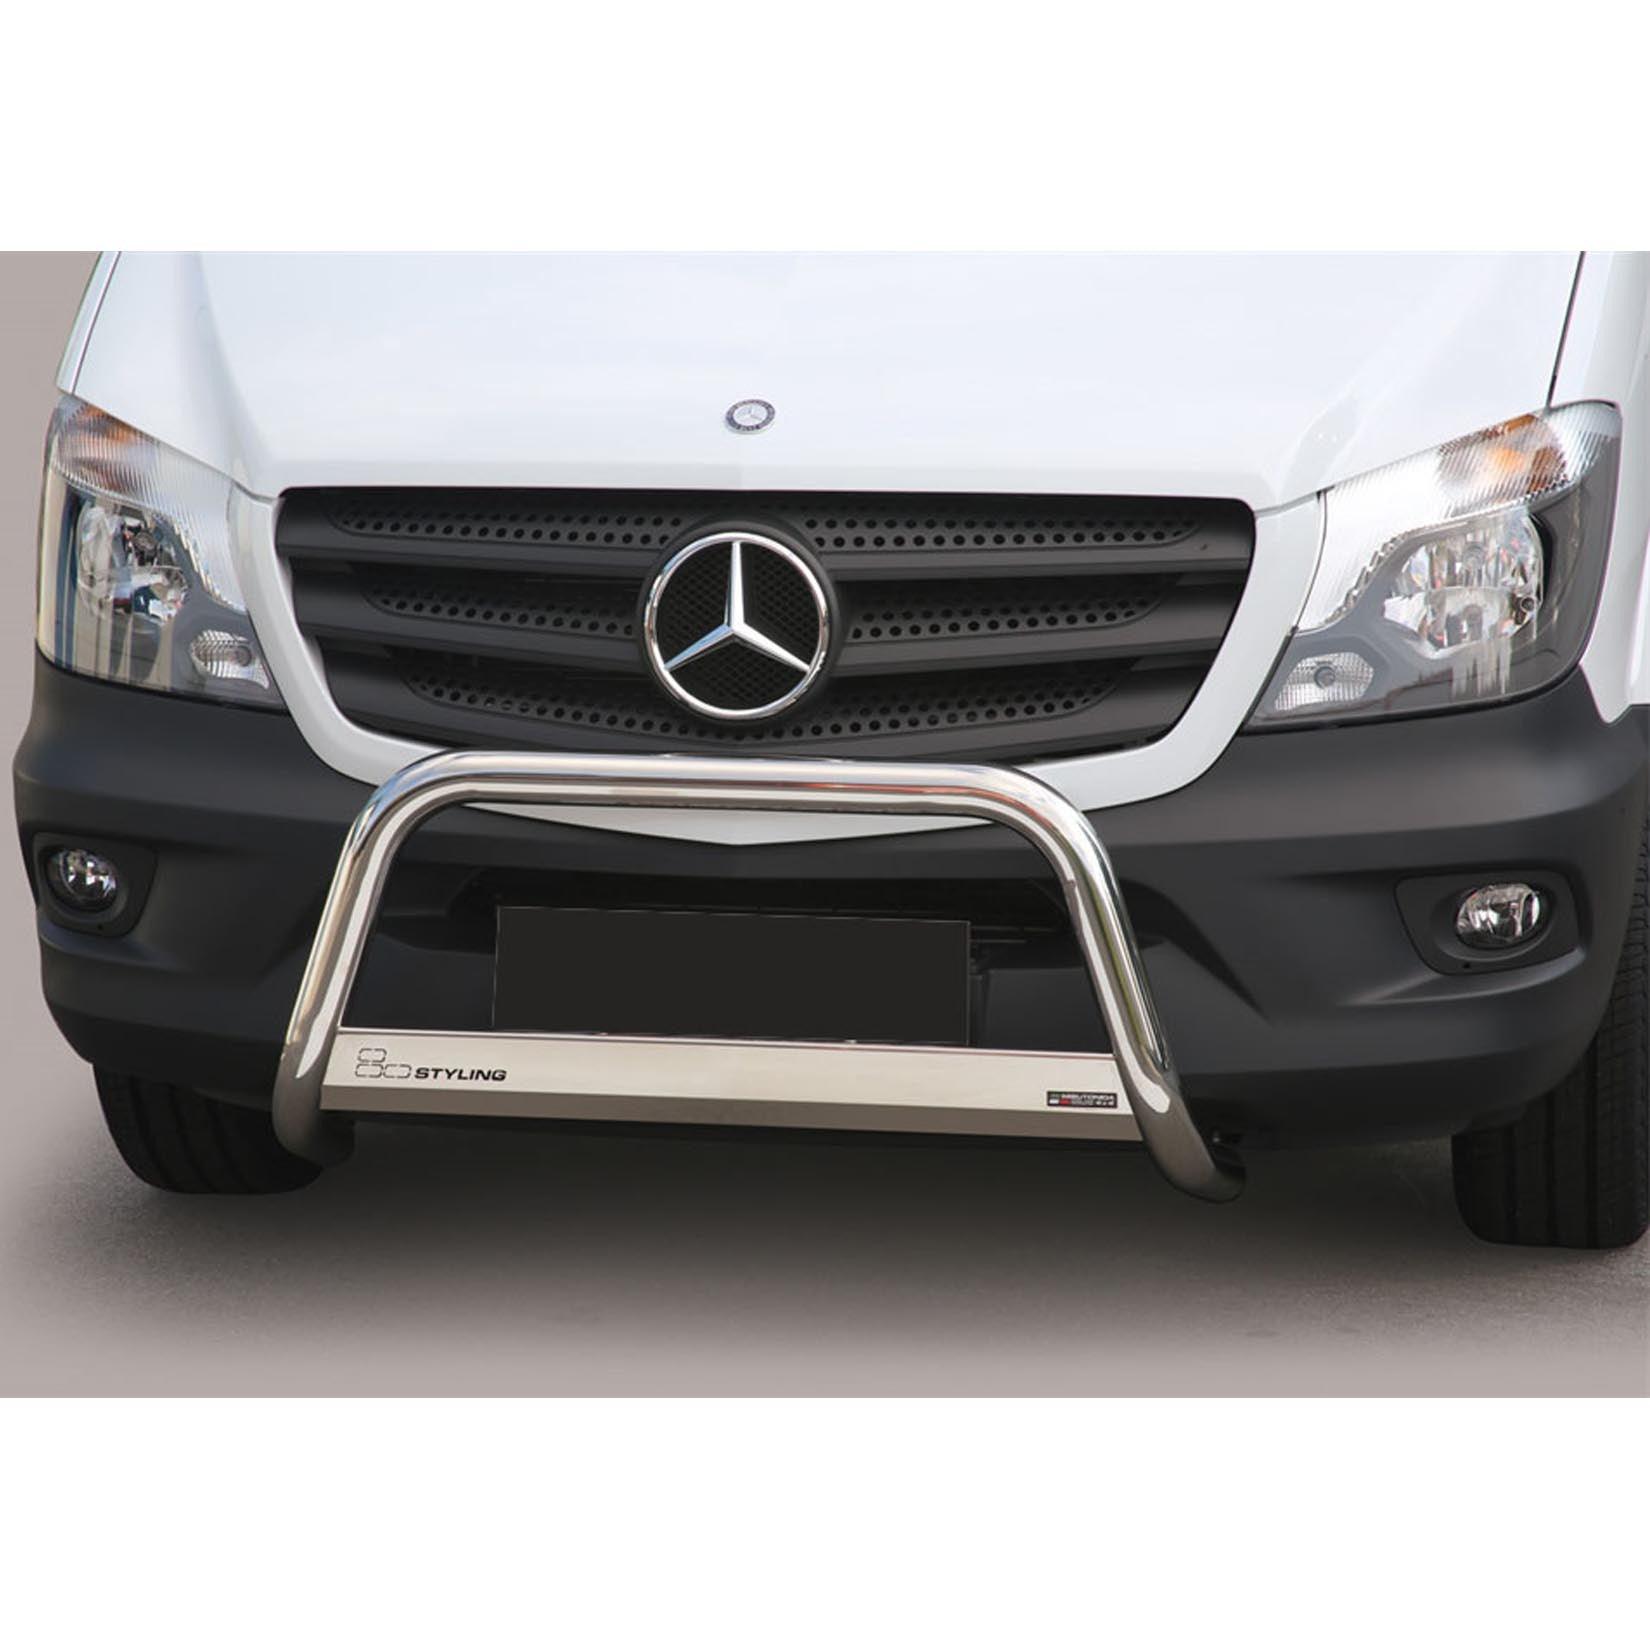 MERCEDES SPRINTER 2014 ON MISUTONIDA EC APPROVED FRONT A-BAR - 63MM - STAINLESS FINISH - Storm Xccessories2